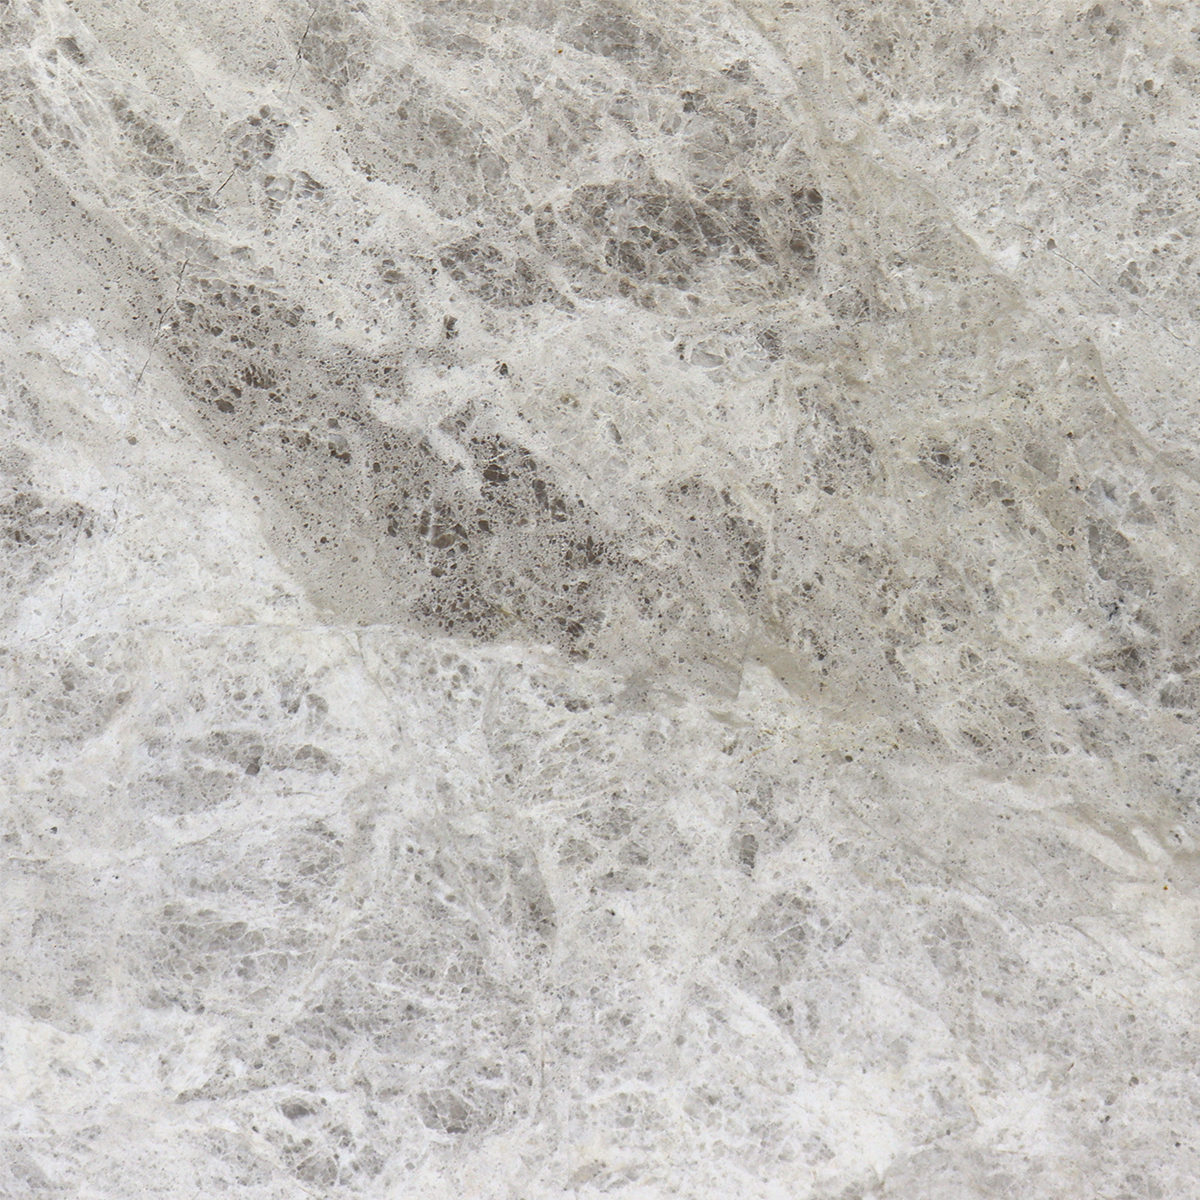 static/products/marbleSlabs/products/MG22.png 